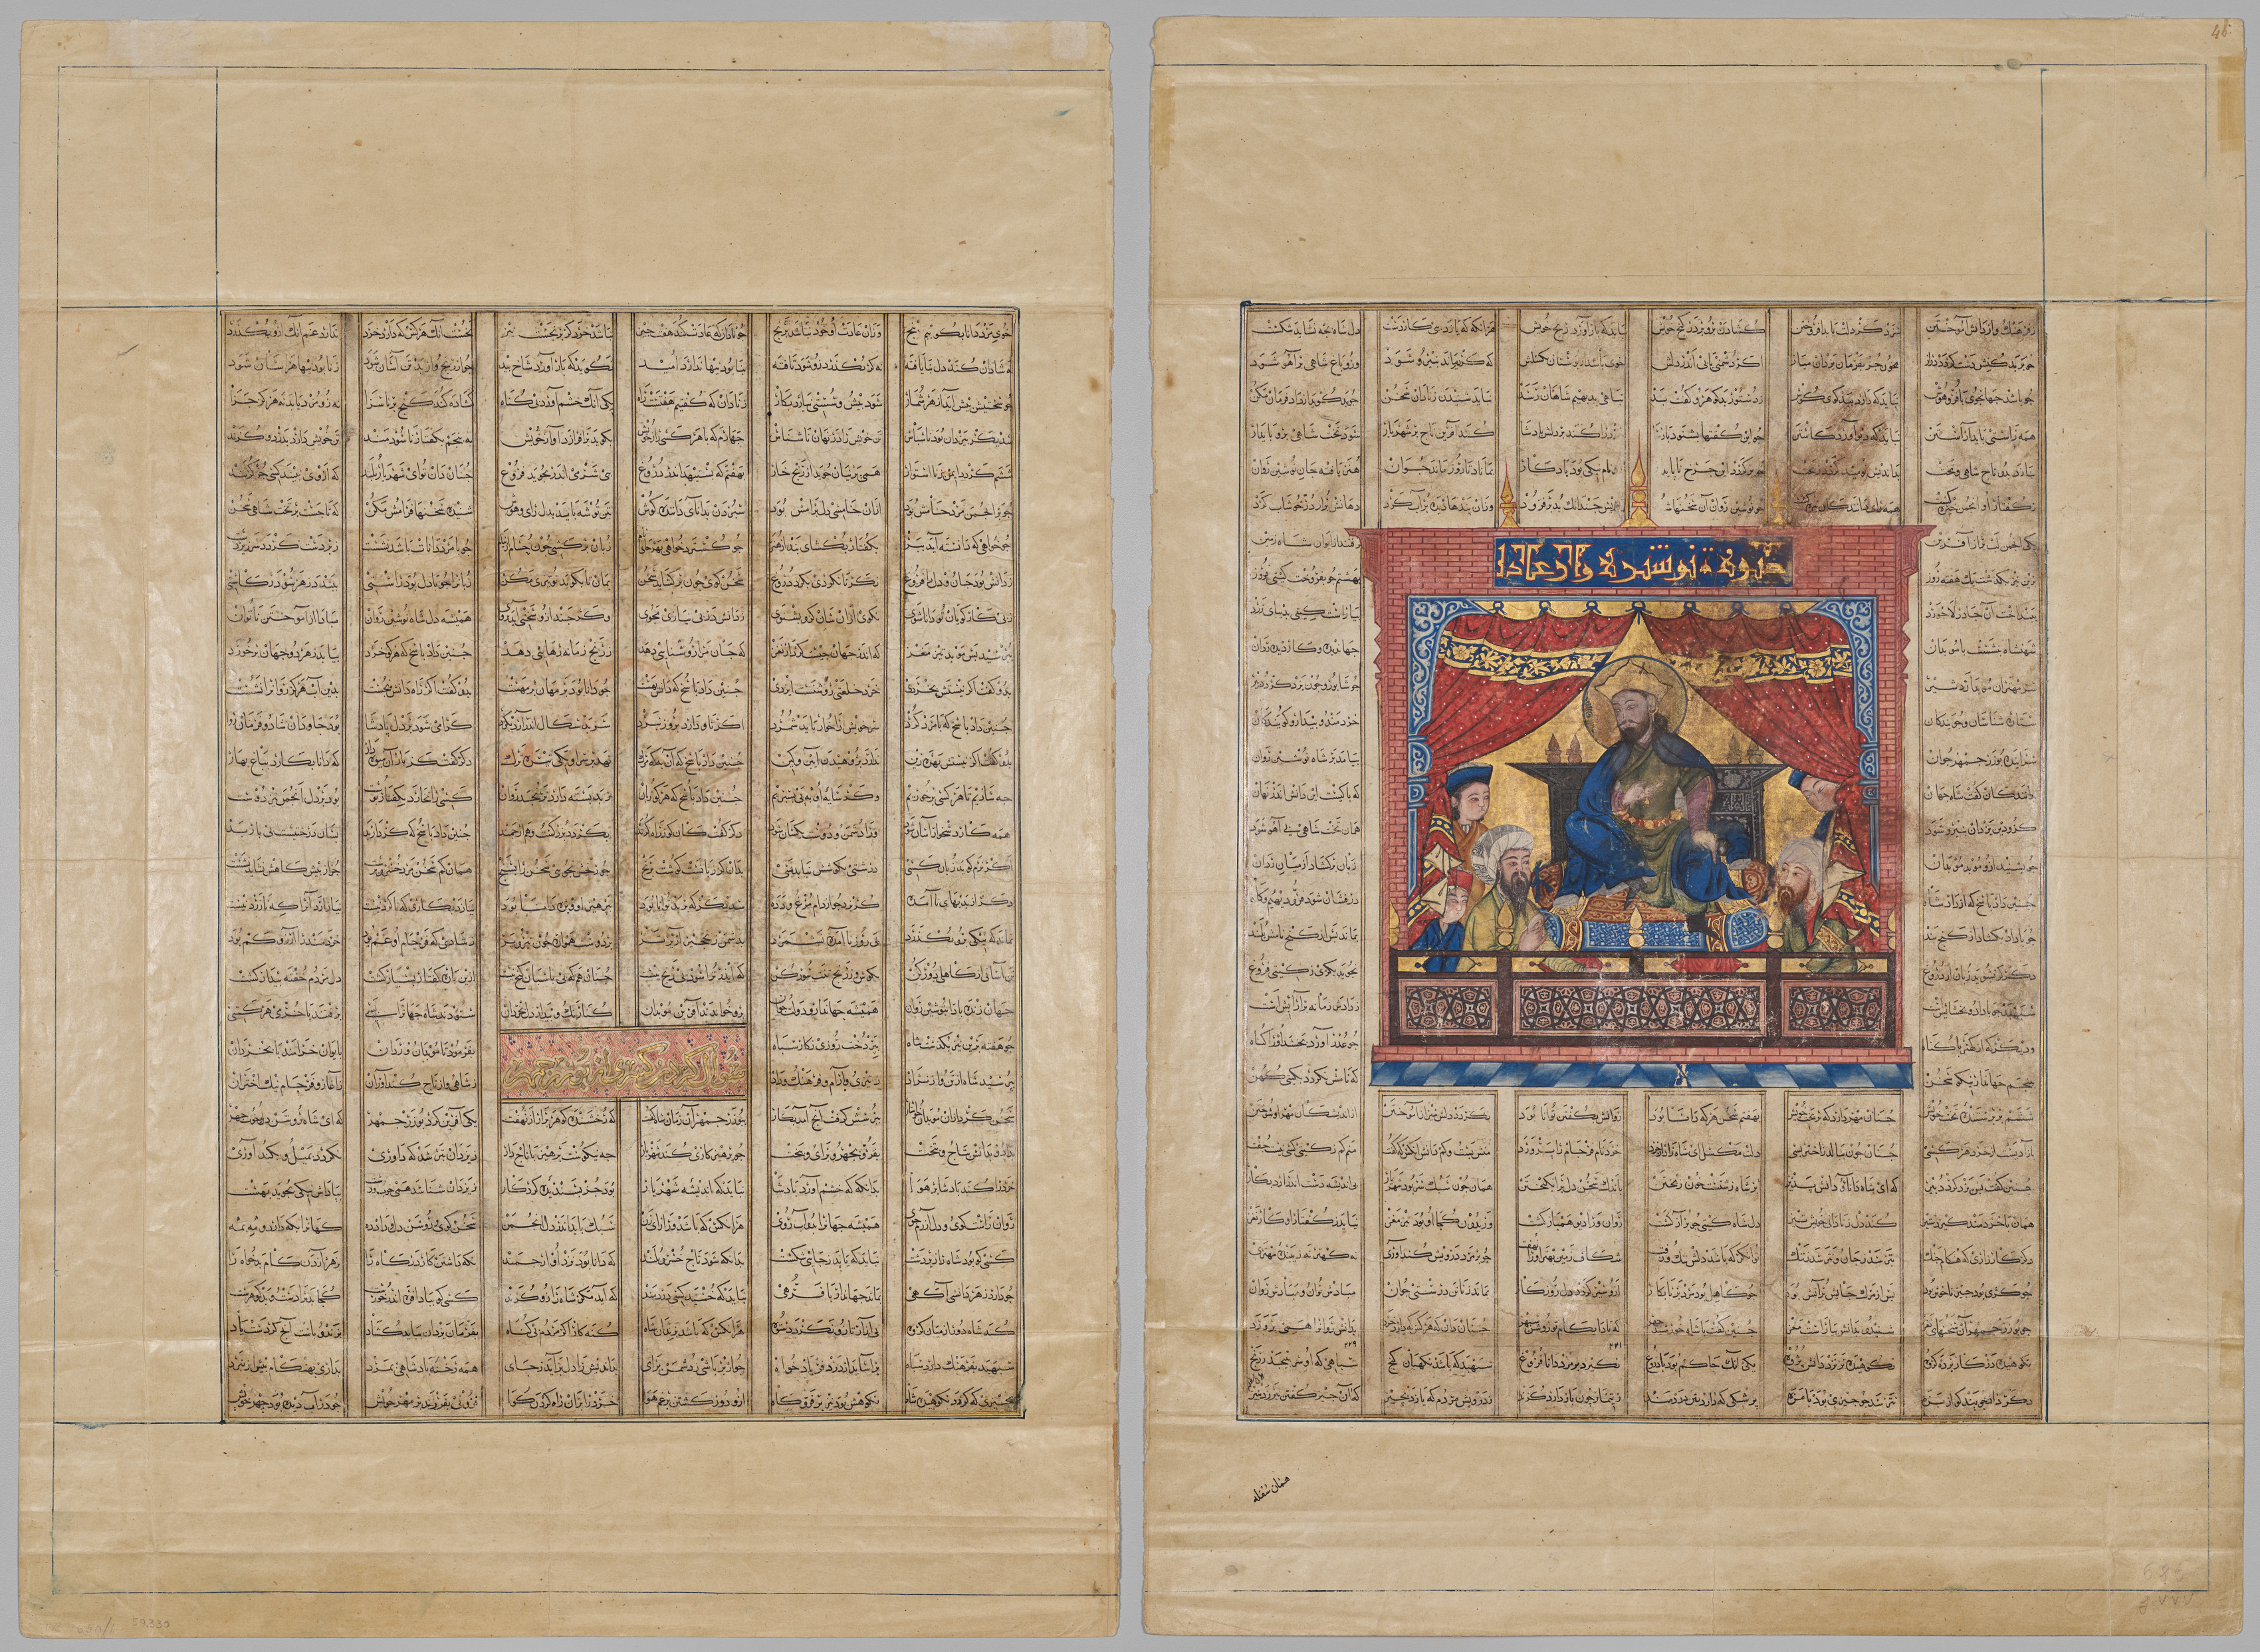 Persian Verses: The Fortieth Year of King Kisra Nushirwan's Reign and the Story of Buzurgmihr (recto); Portrait of Nushirwan the Just (verso) from a Shahnama (Book of Kings) of Firdausi (940–1019 or 1025)